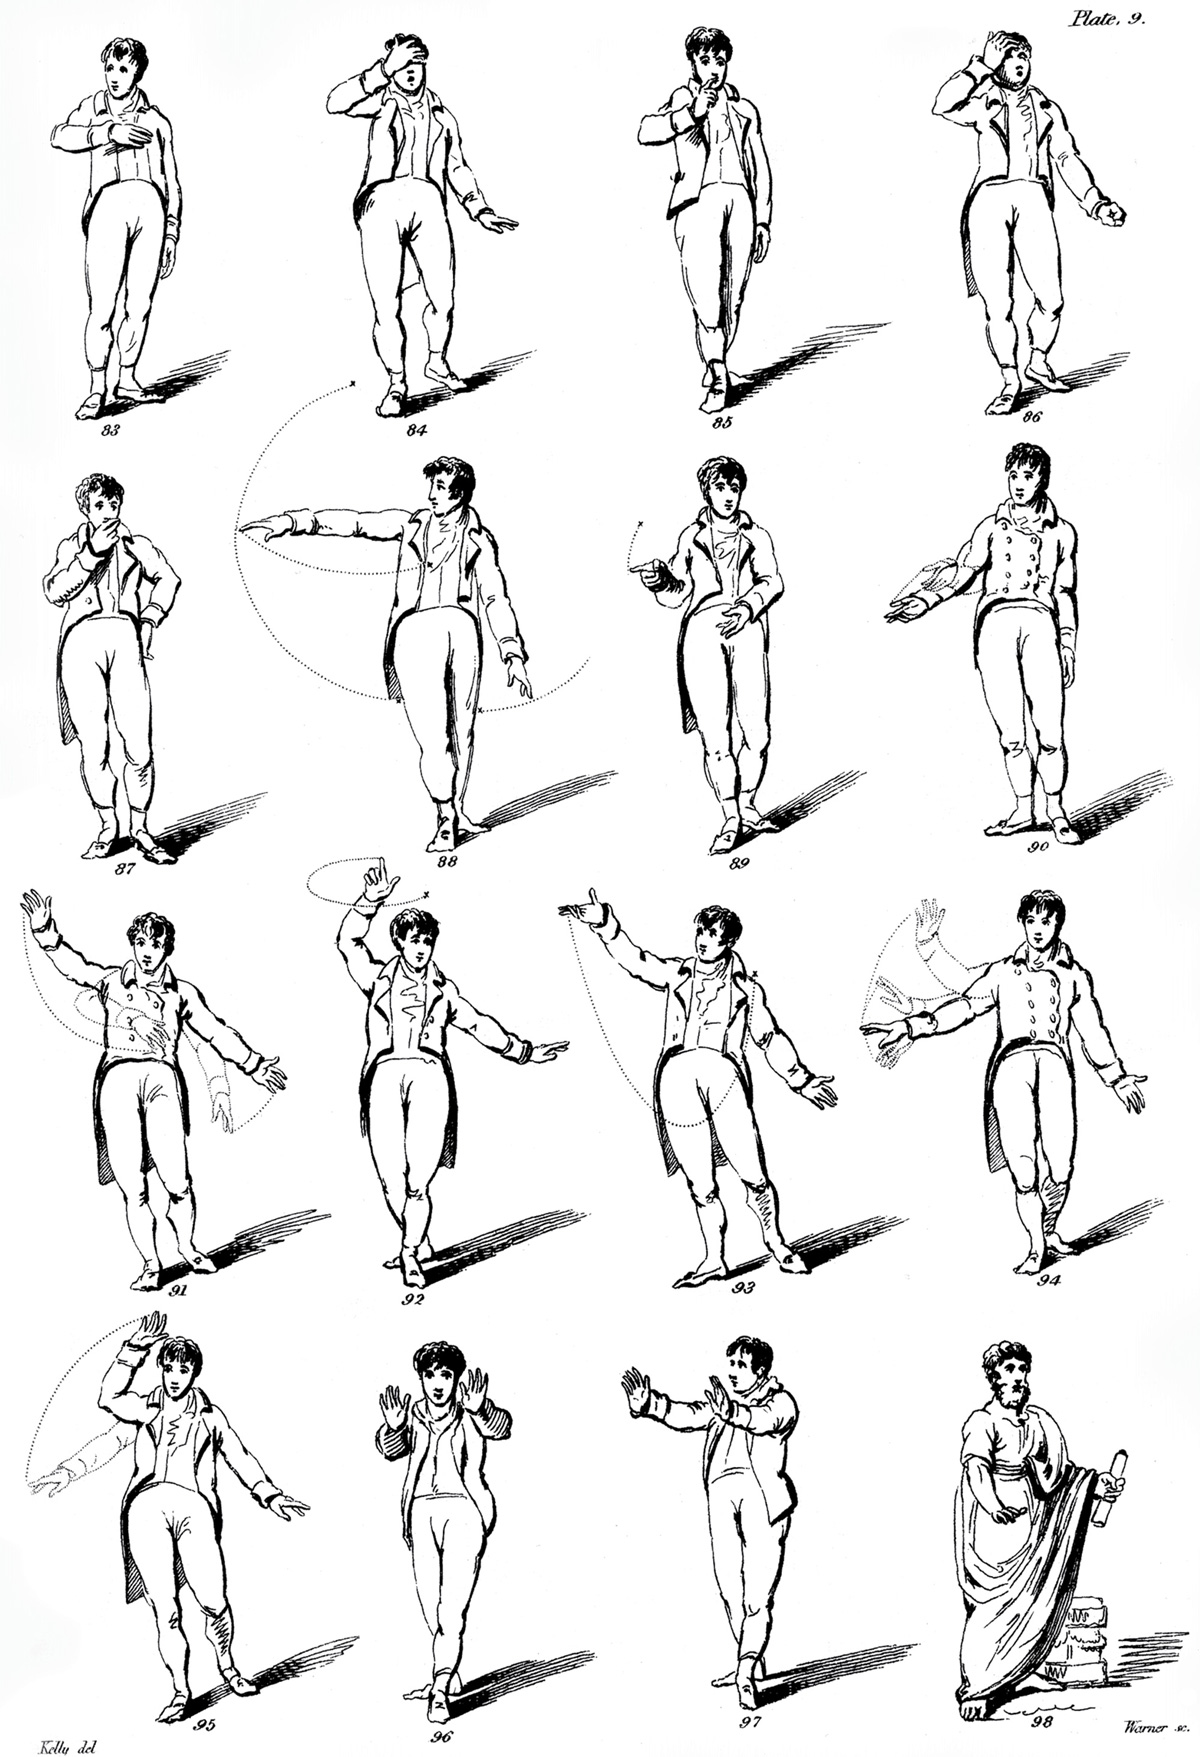 Plate 9 from Gilbert Austin’s eighteen oh six book “Chironomia” illustrating 16 different hand gestures.